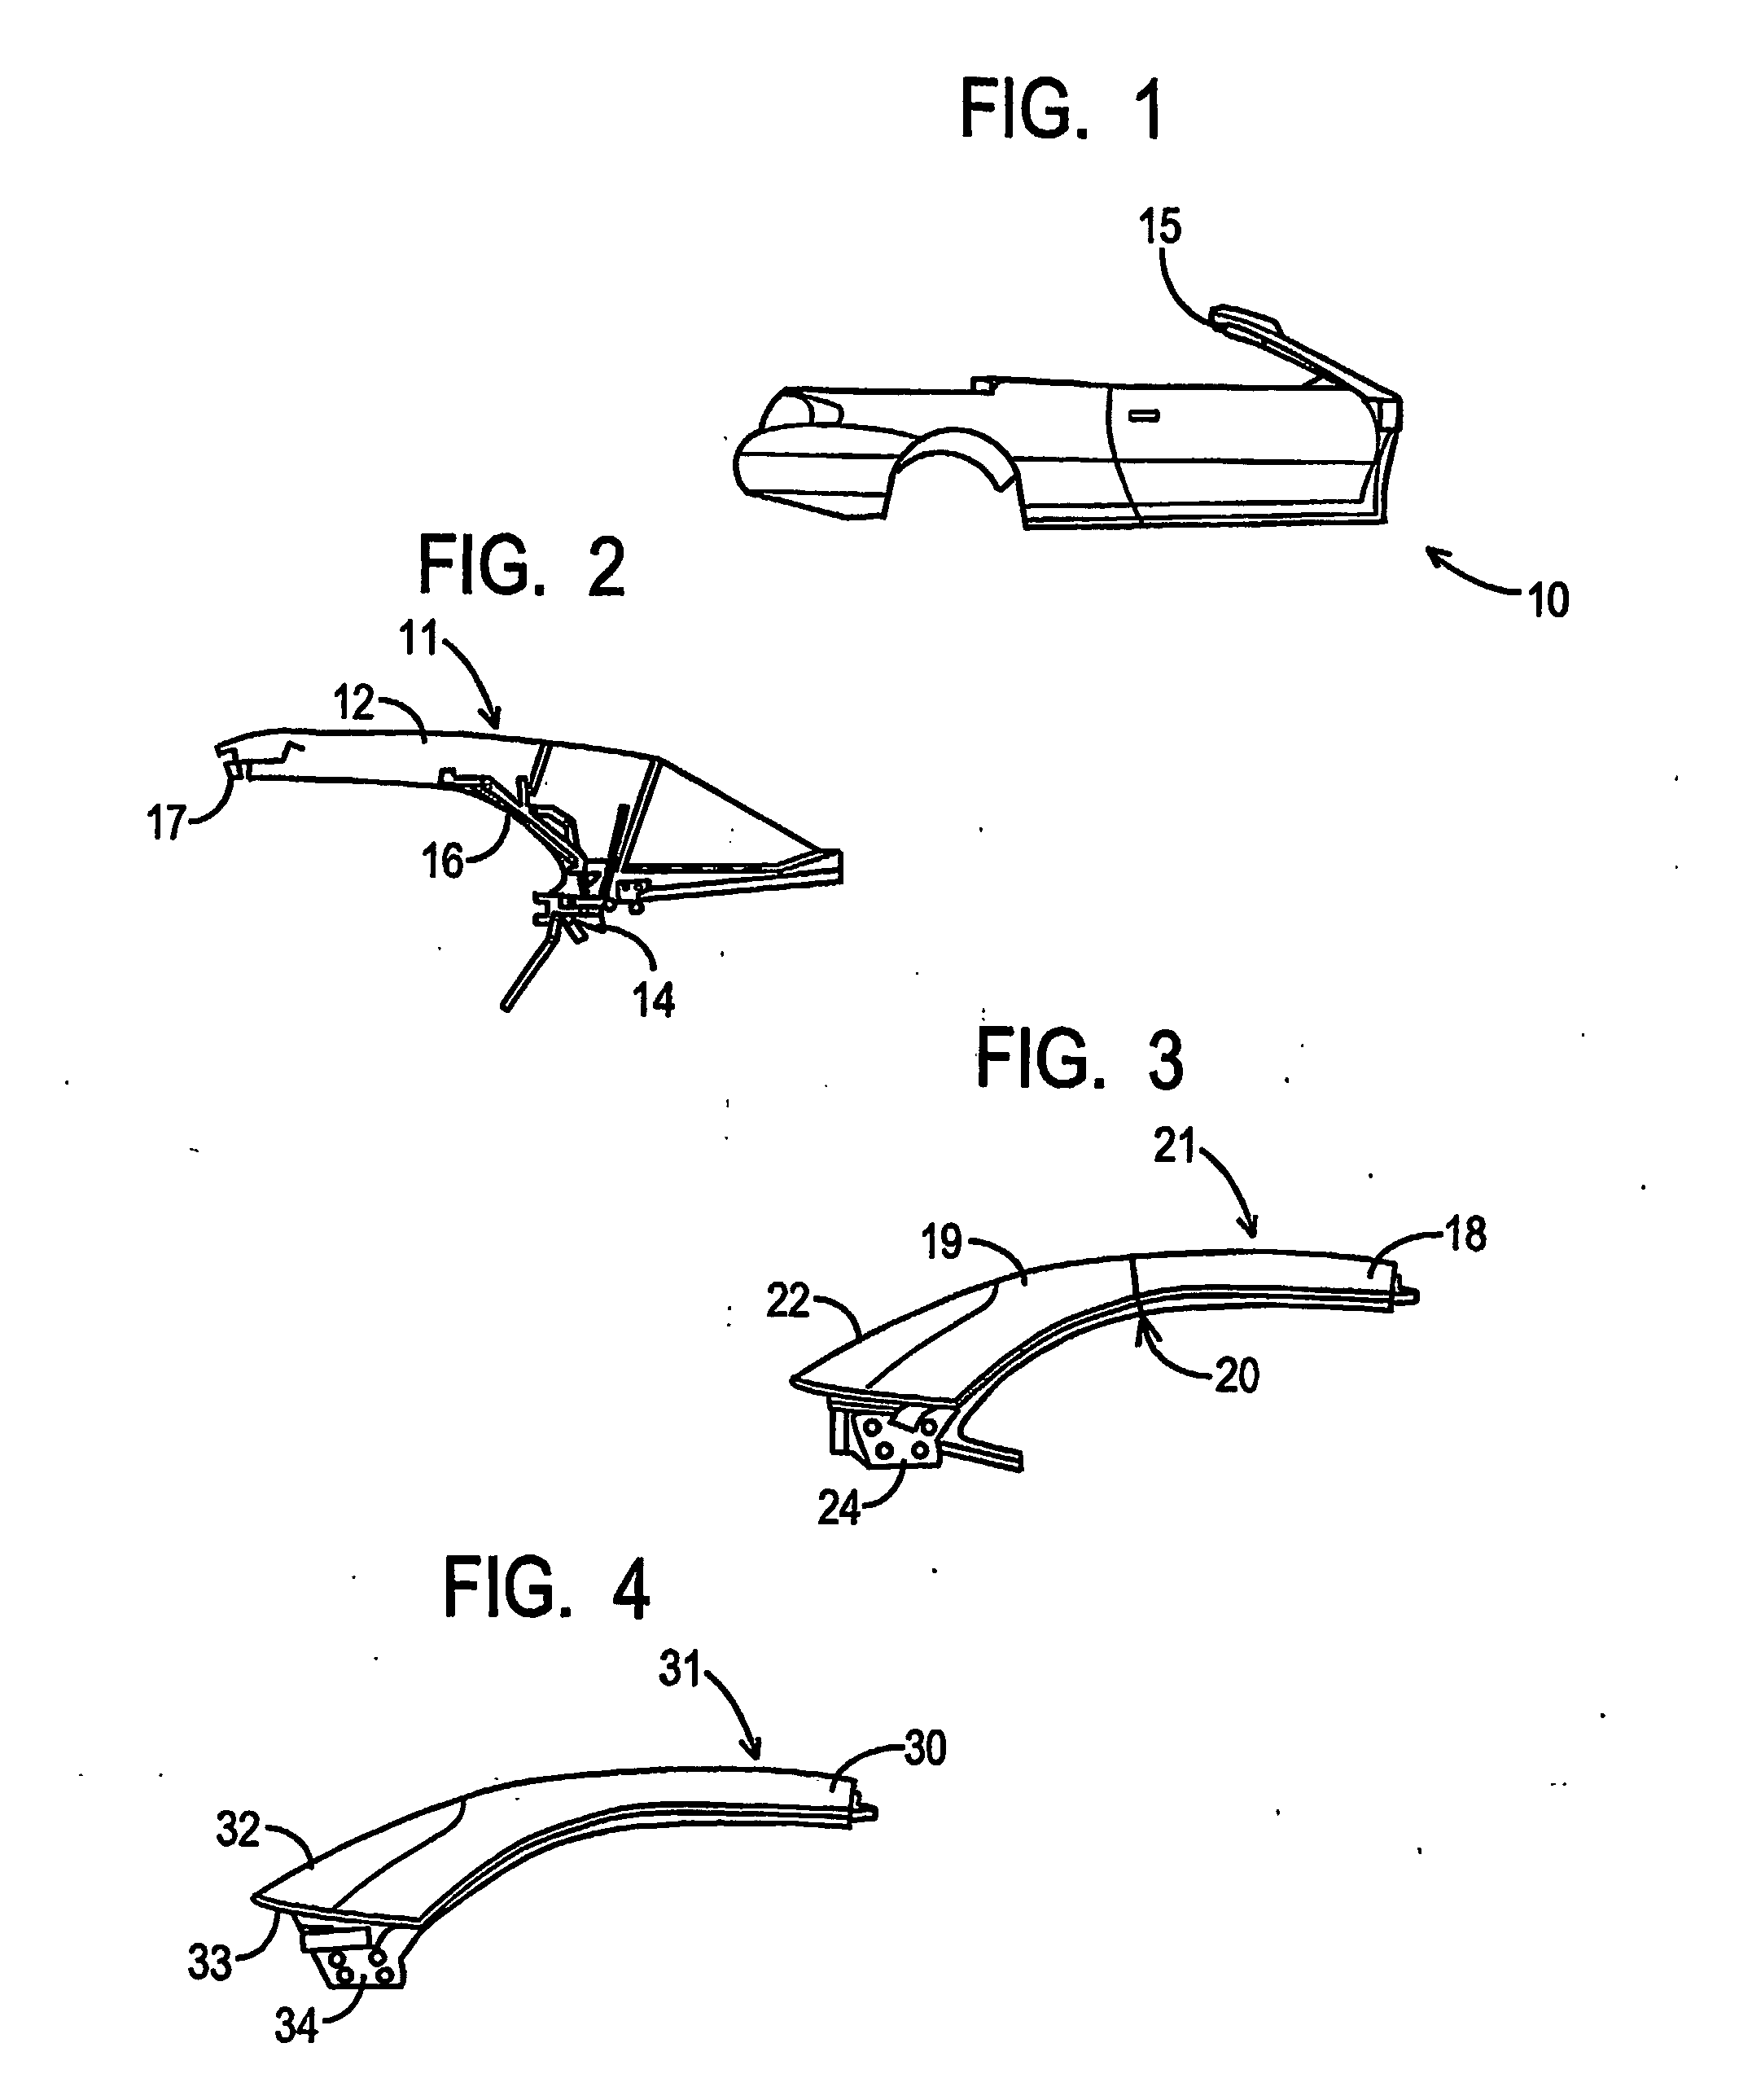 Multiple Roof Configurations For a Single Vehicle Platform